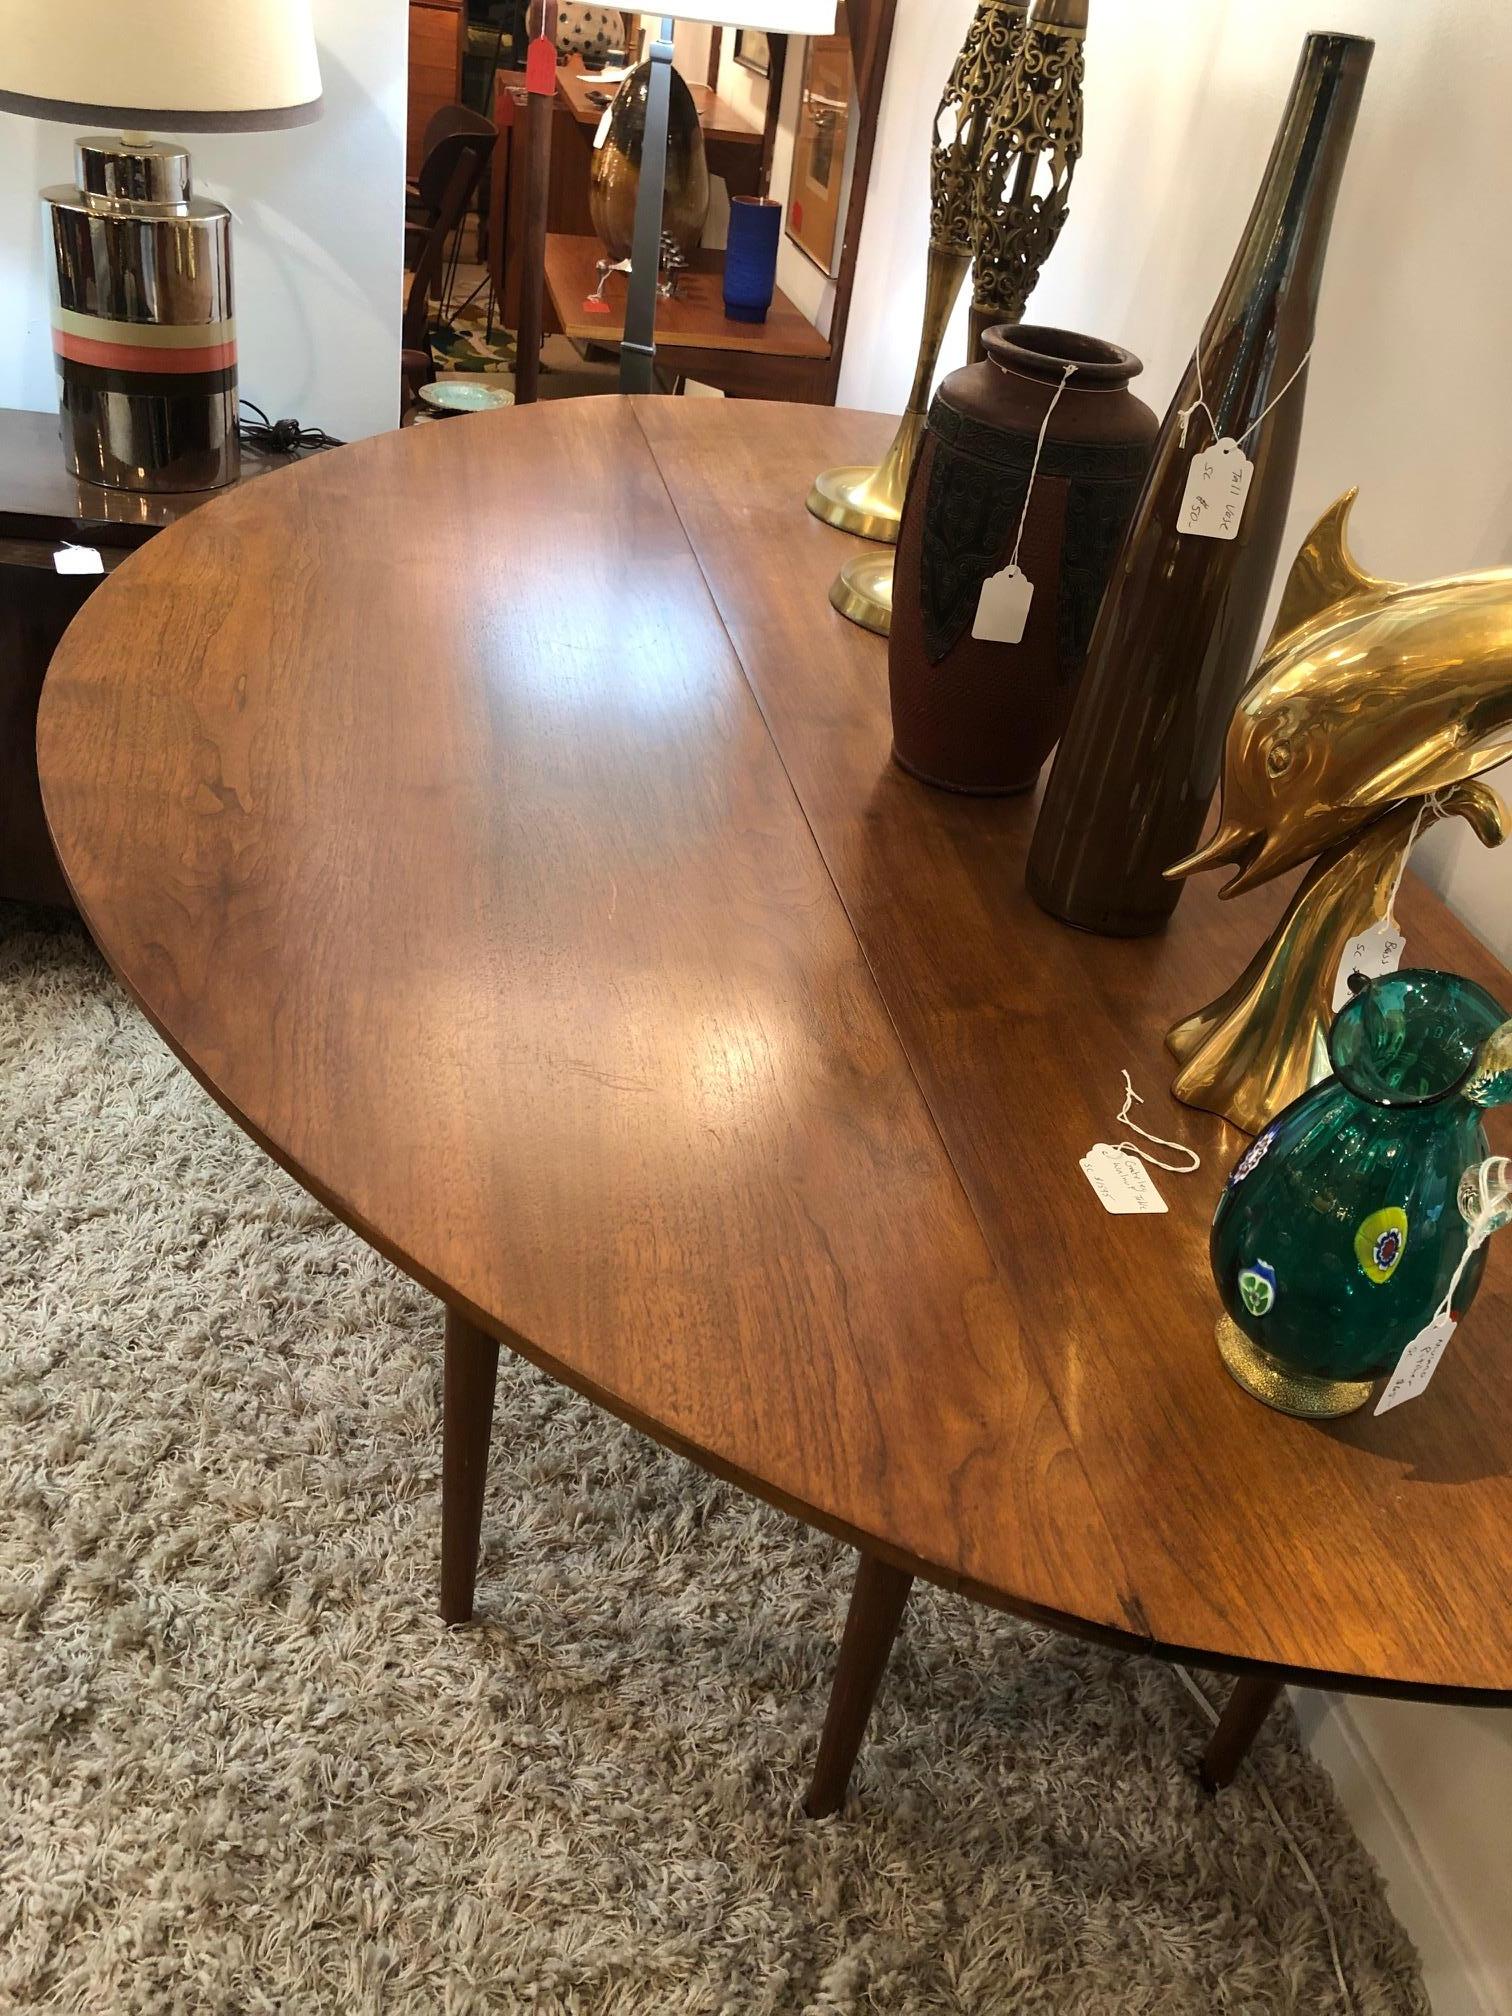 Polished Large Midcentury Drop-Leaf Gate Leg Oval Table or Console